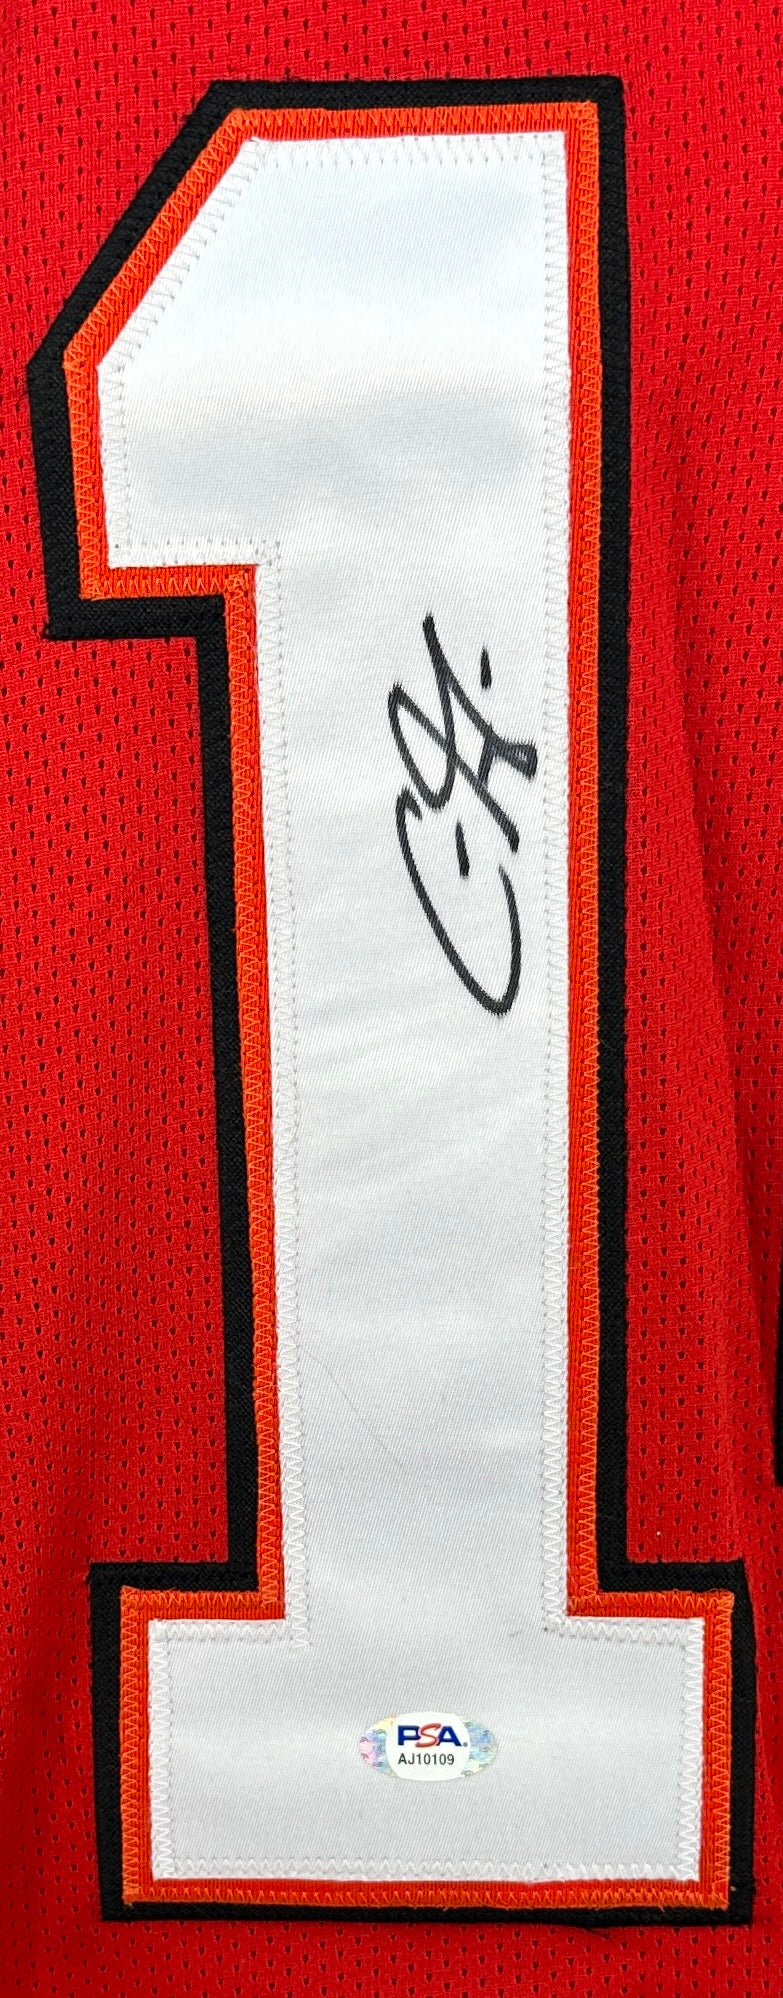 CHRIS GODWIN AUTOGRAPHED SIGNED RED PRO STLYE JERSEY